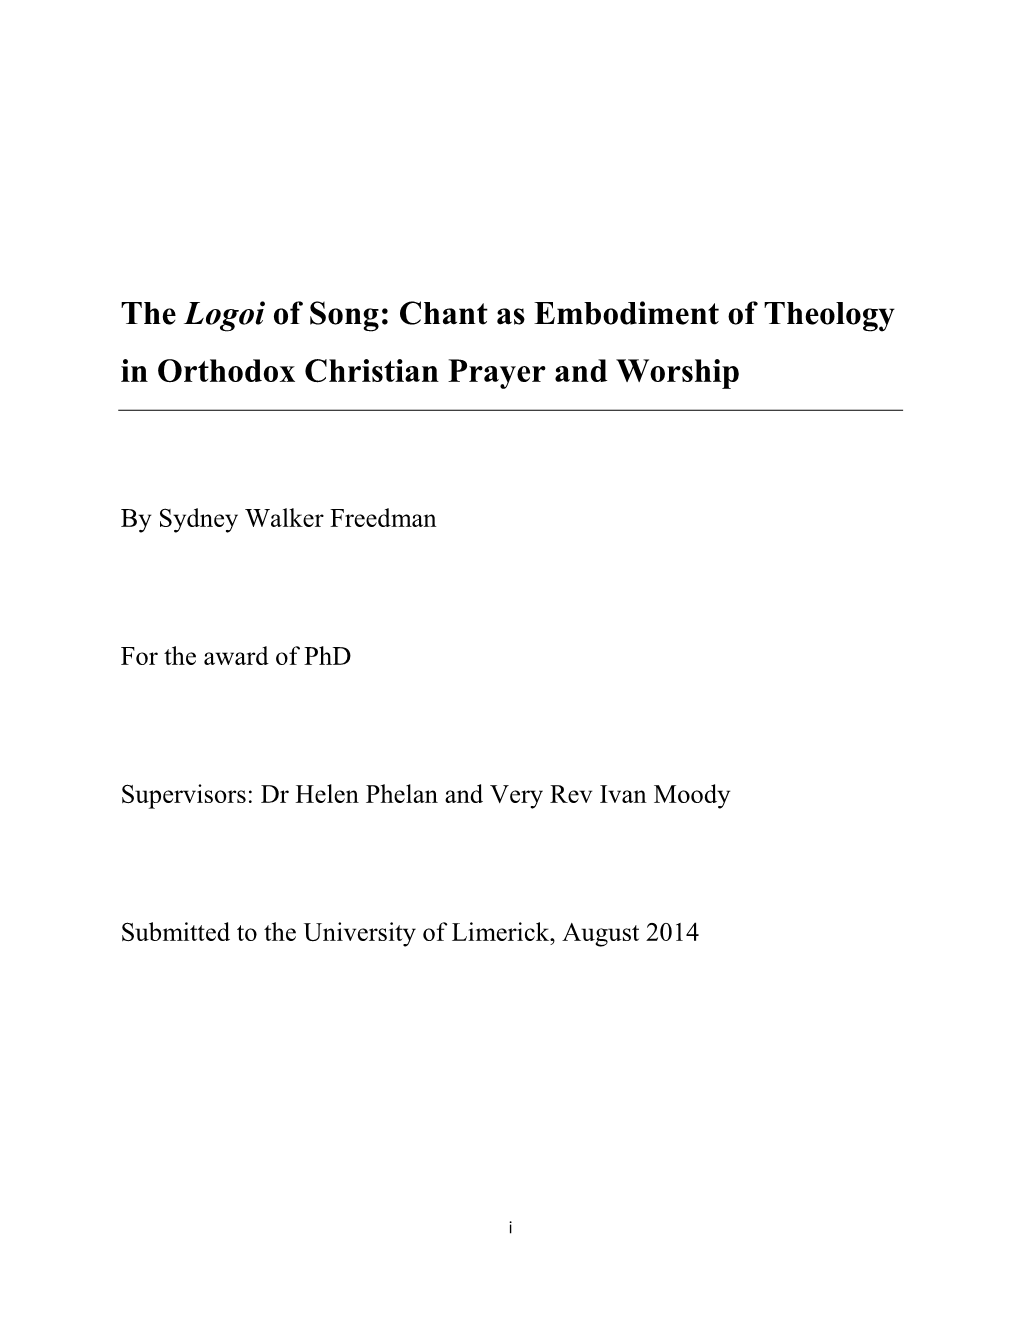 The Logoi of Song: Chant As Embodiment of Theology in Orthodox Christian Prayer and Worship